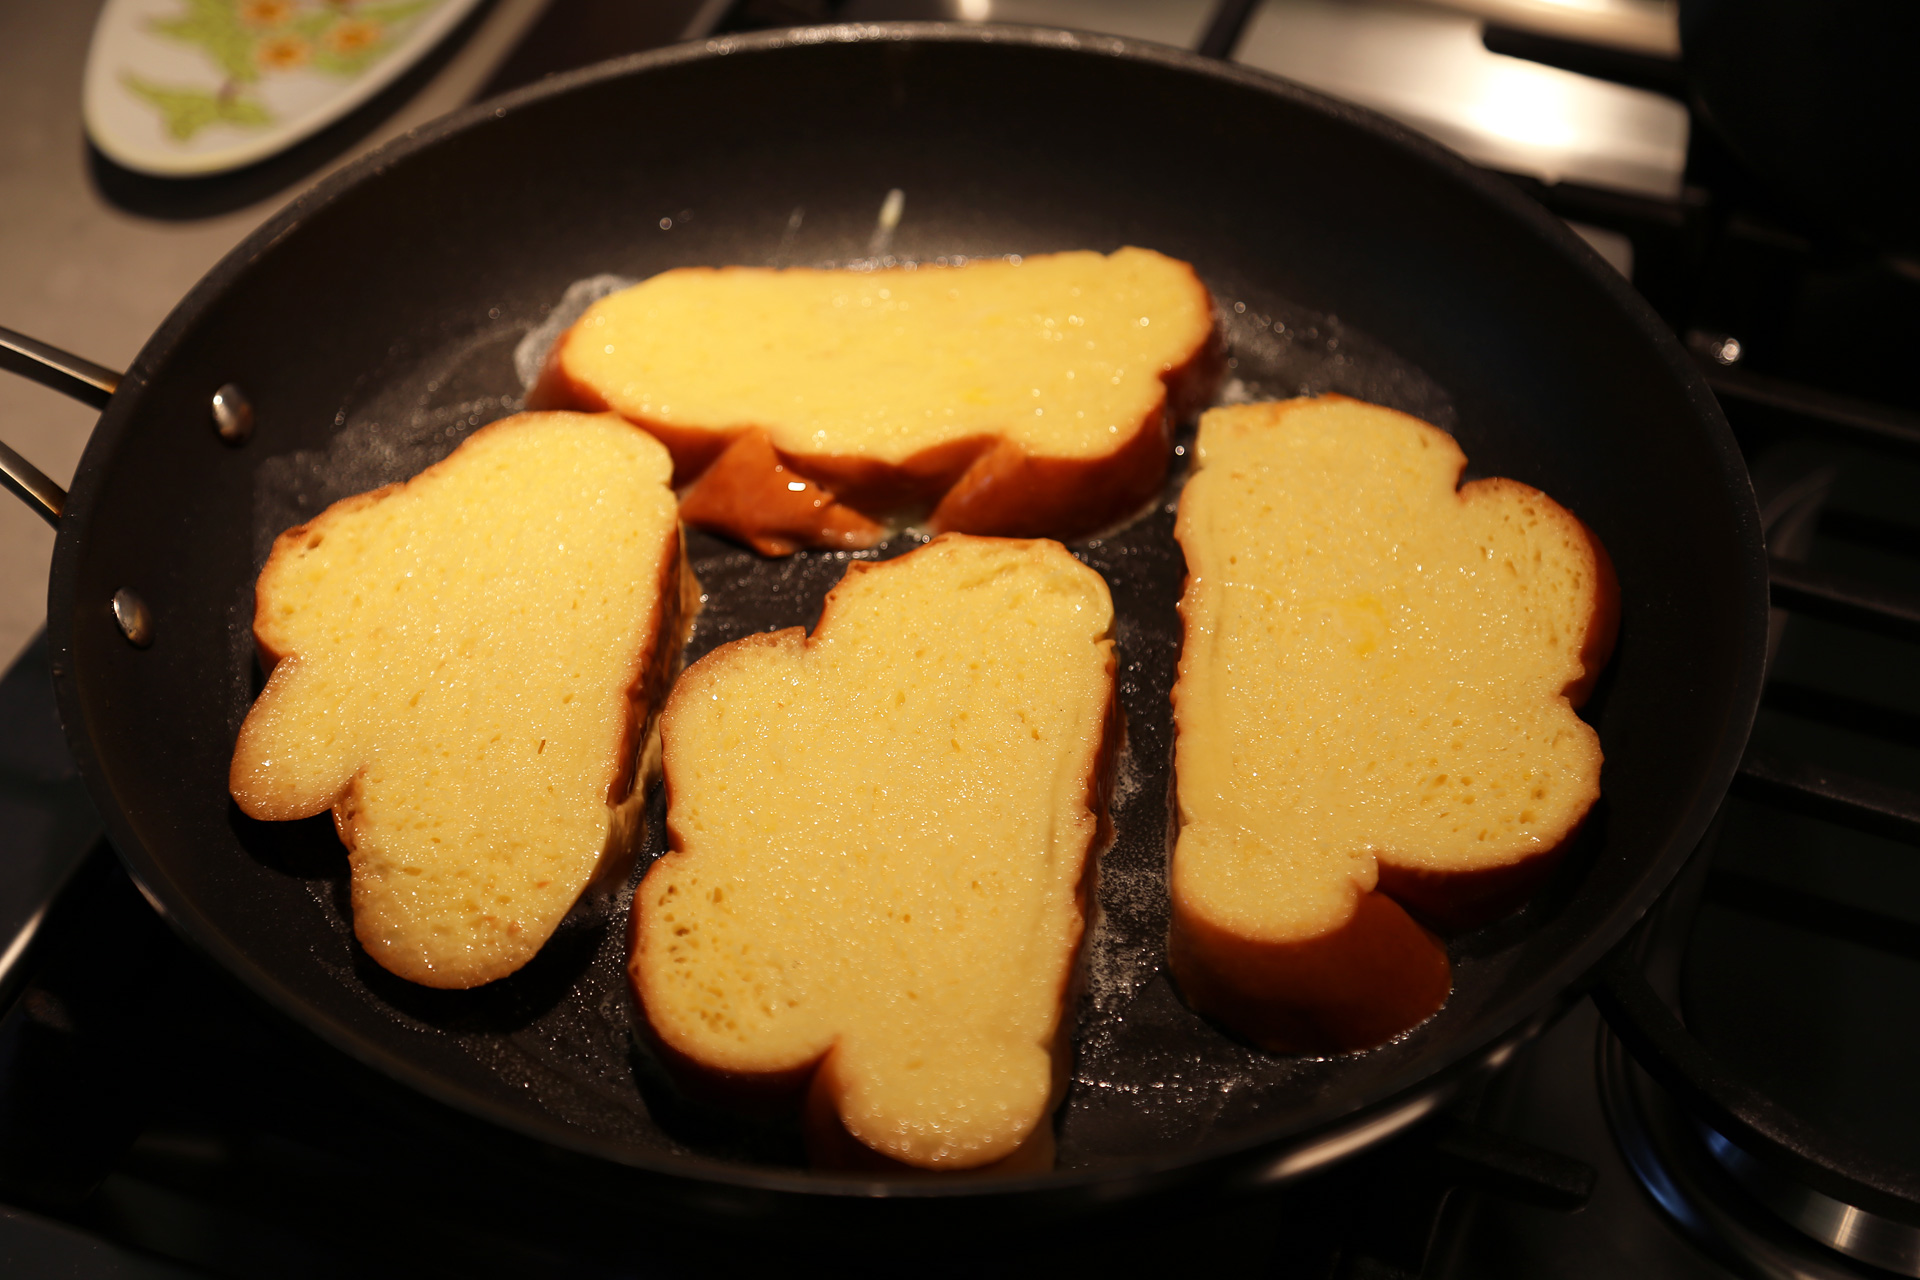 Add as many bread slices as you can easily fit into each pan or on the griddle.